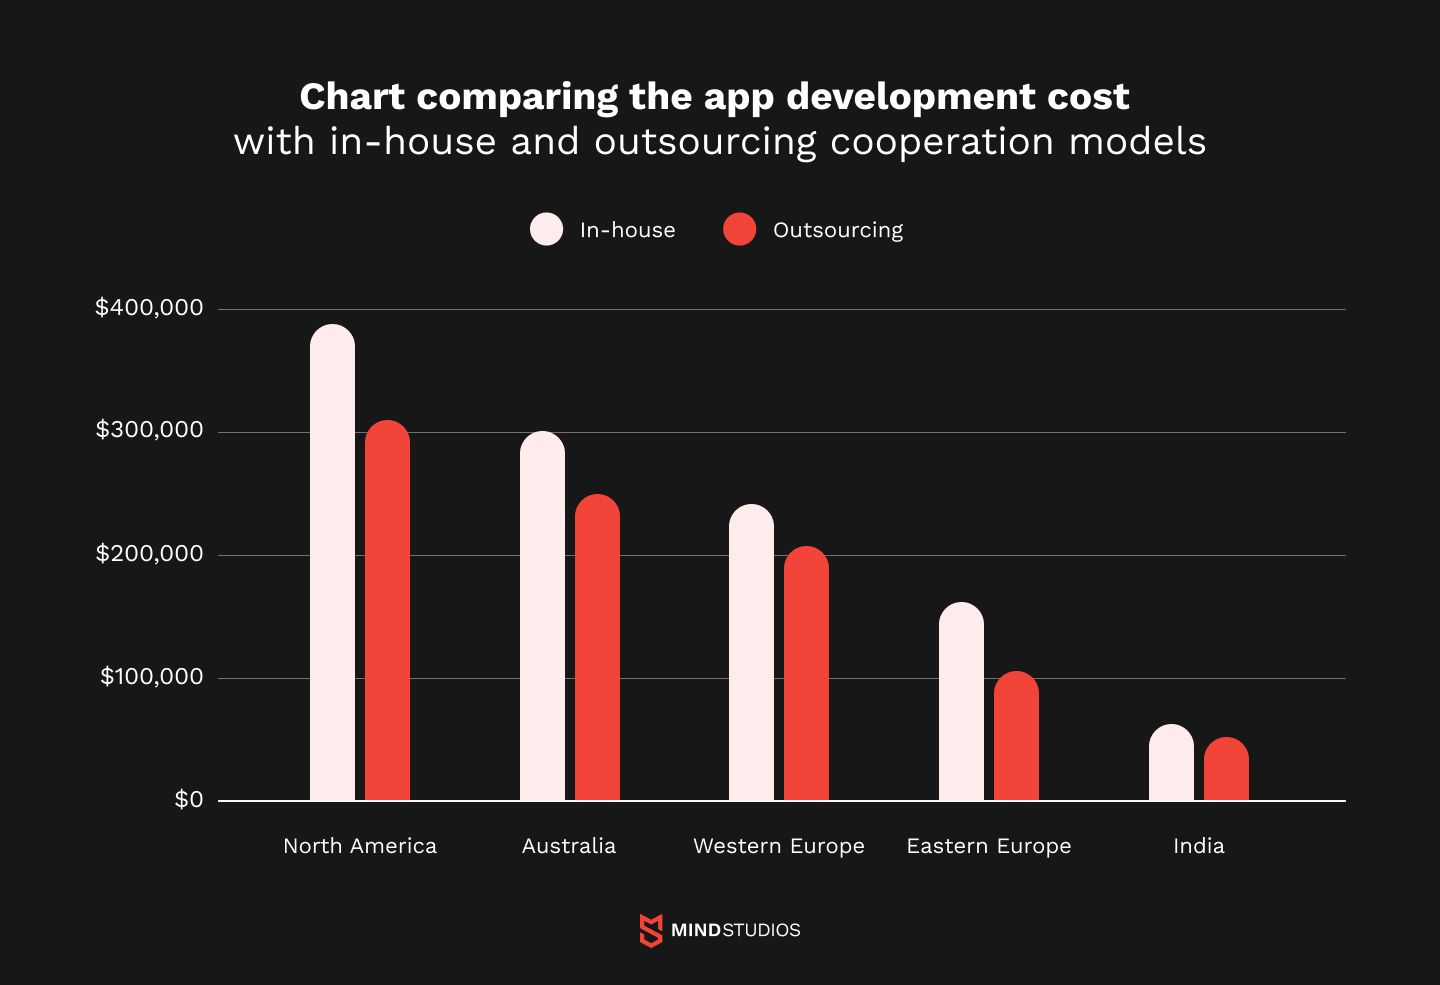 Chart comparing the app development cost with in-house and outsourcing cooperation models